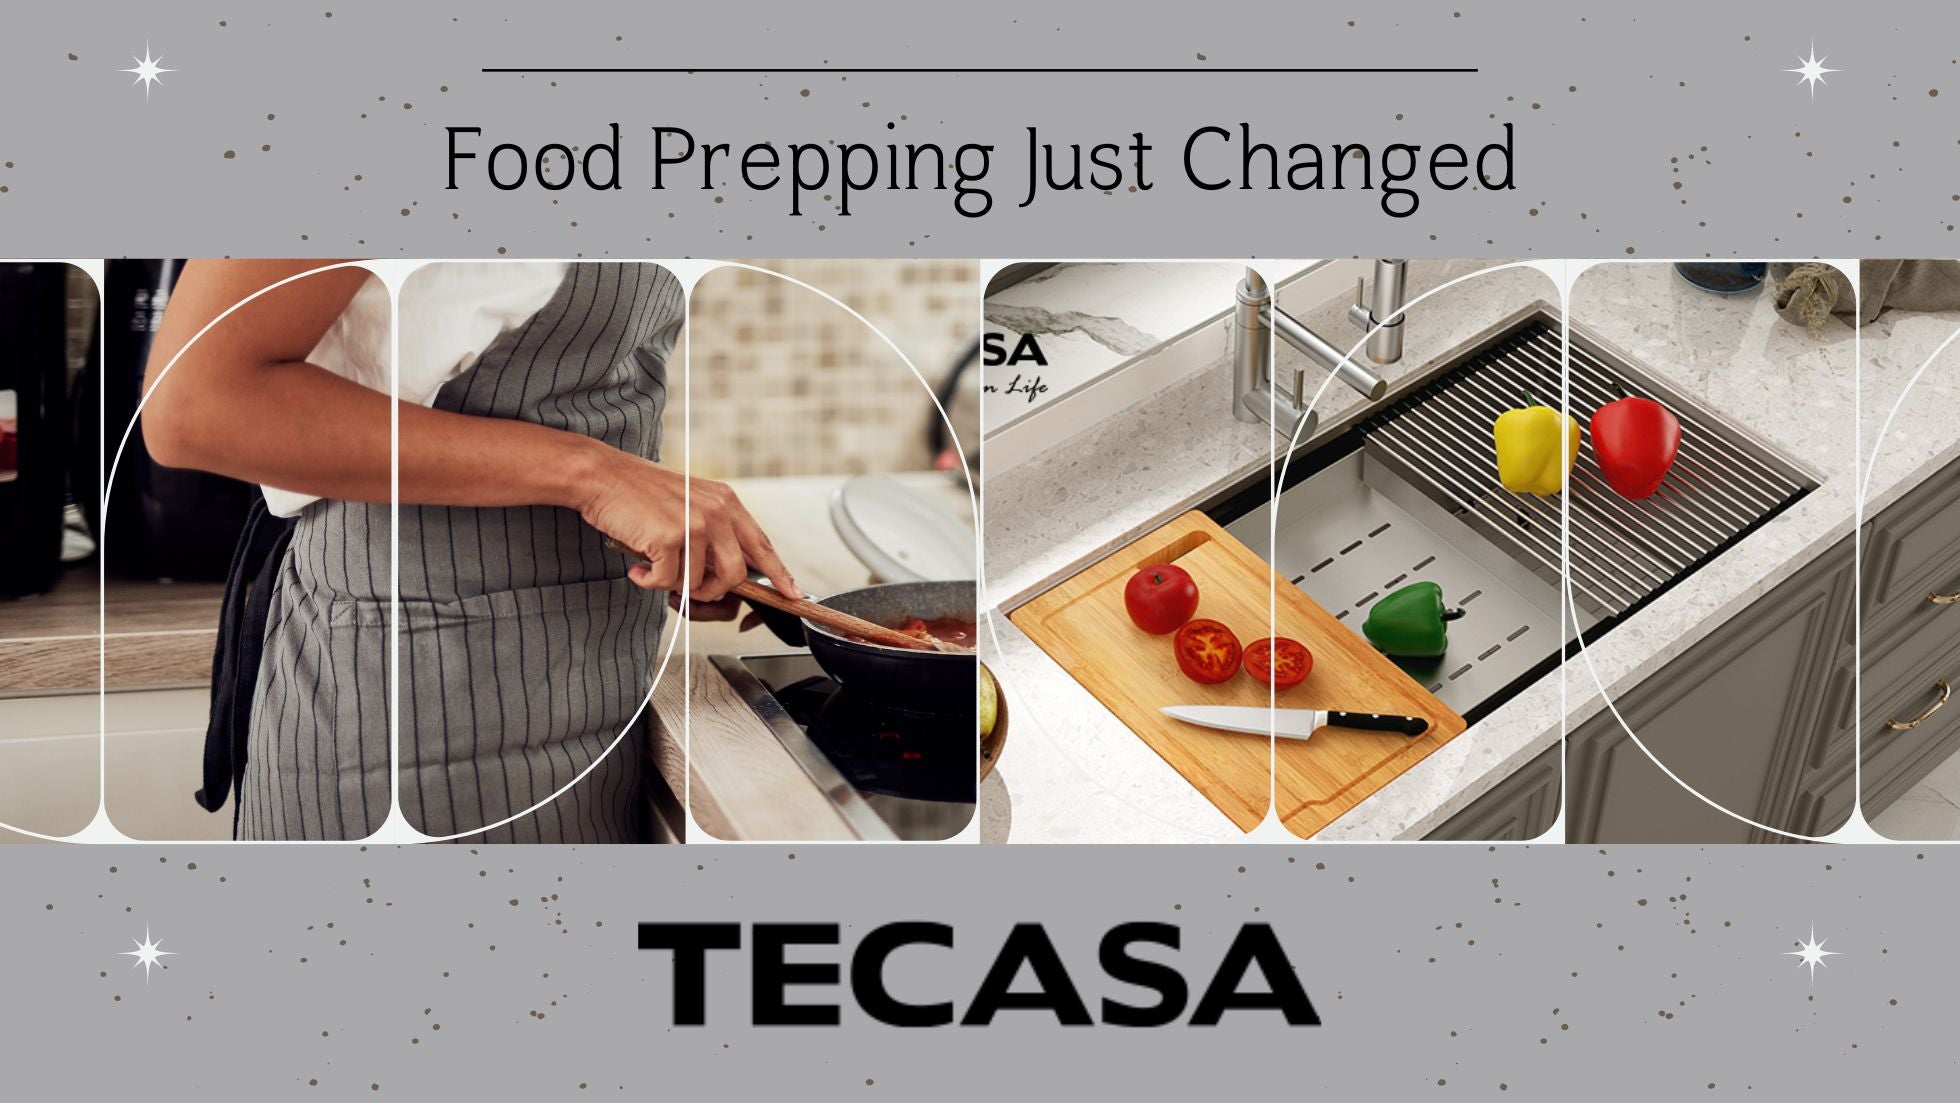 How a Workstation Sink from Tecasa Kitchen Helps Create More Efficiency for Food Prepping